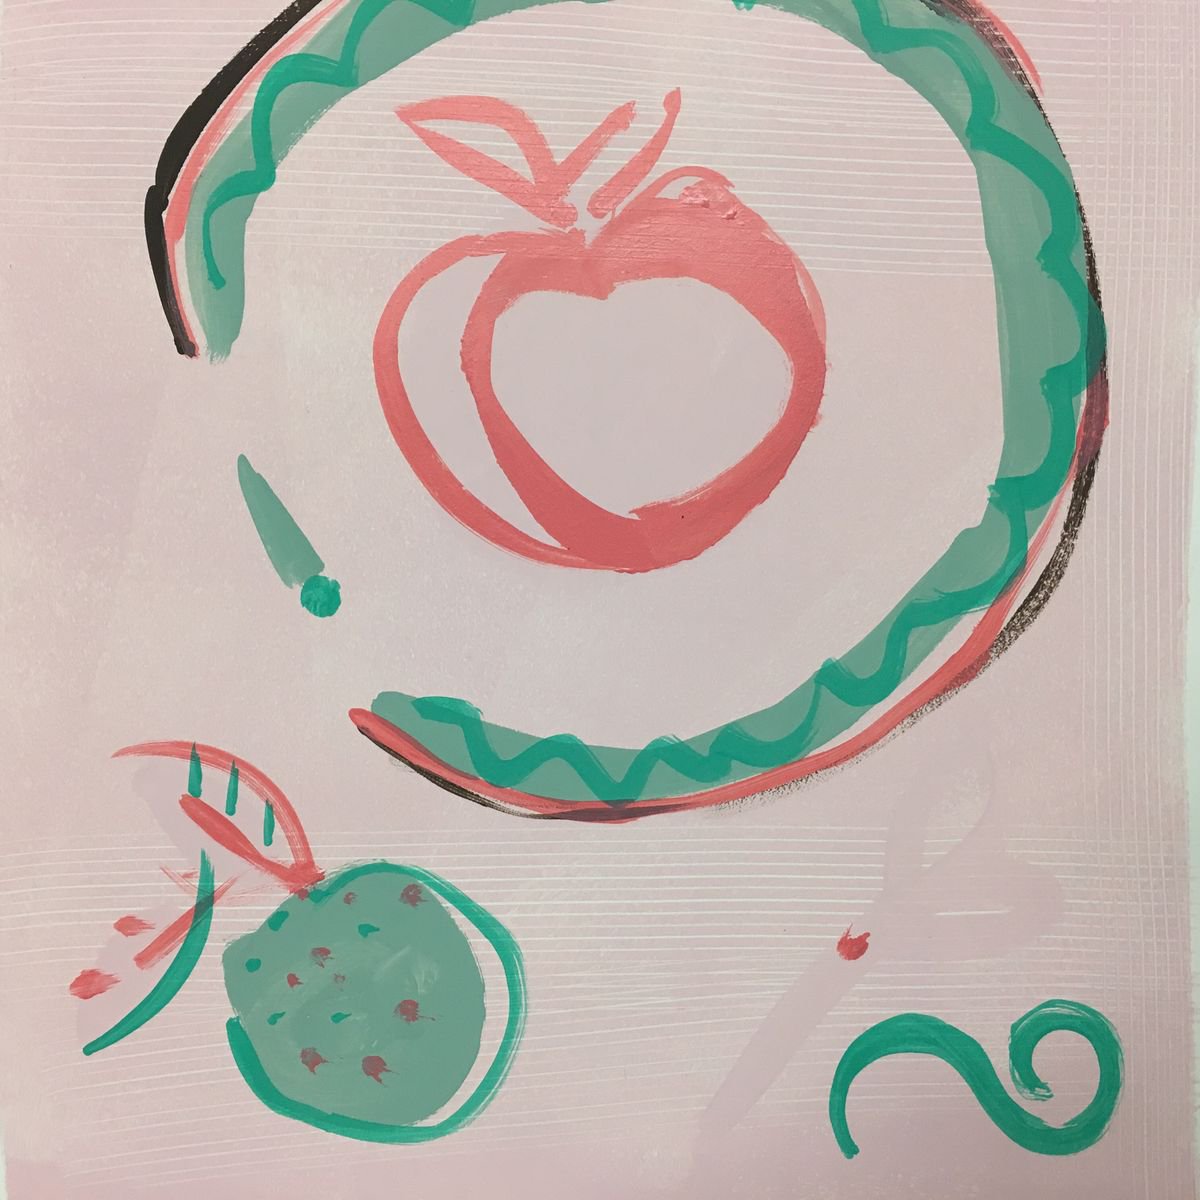 Apple on a plate by Sharon jane